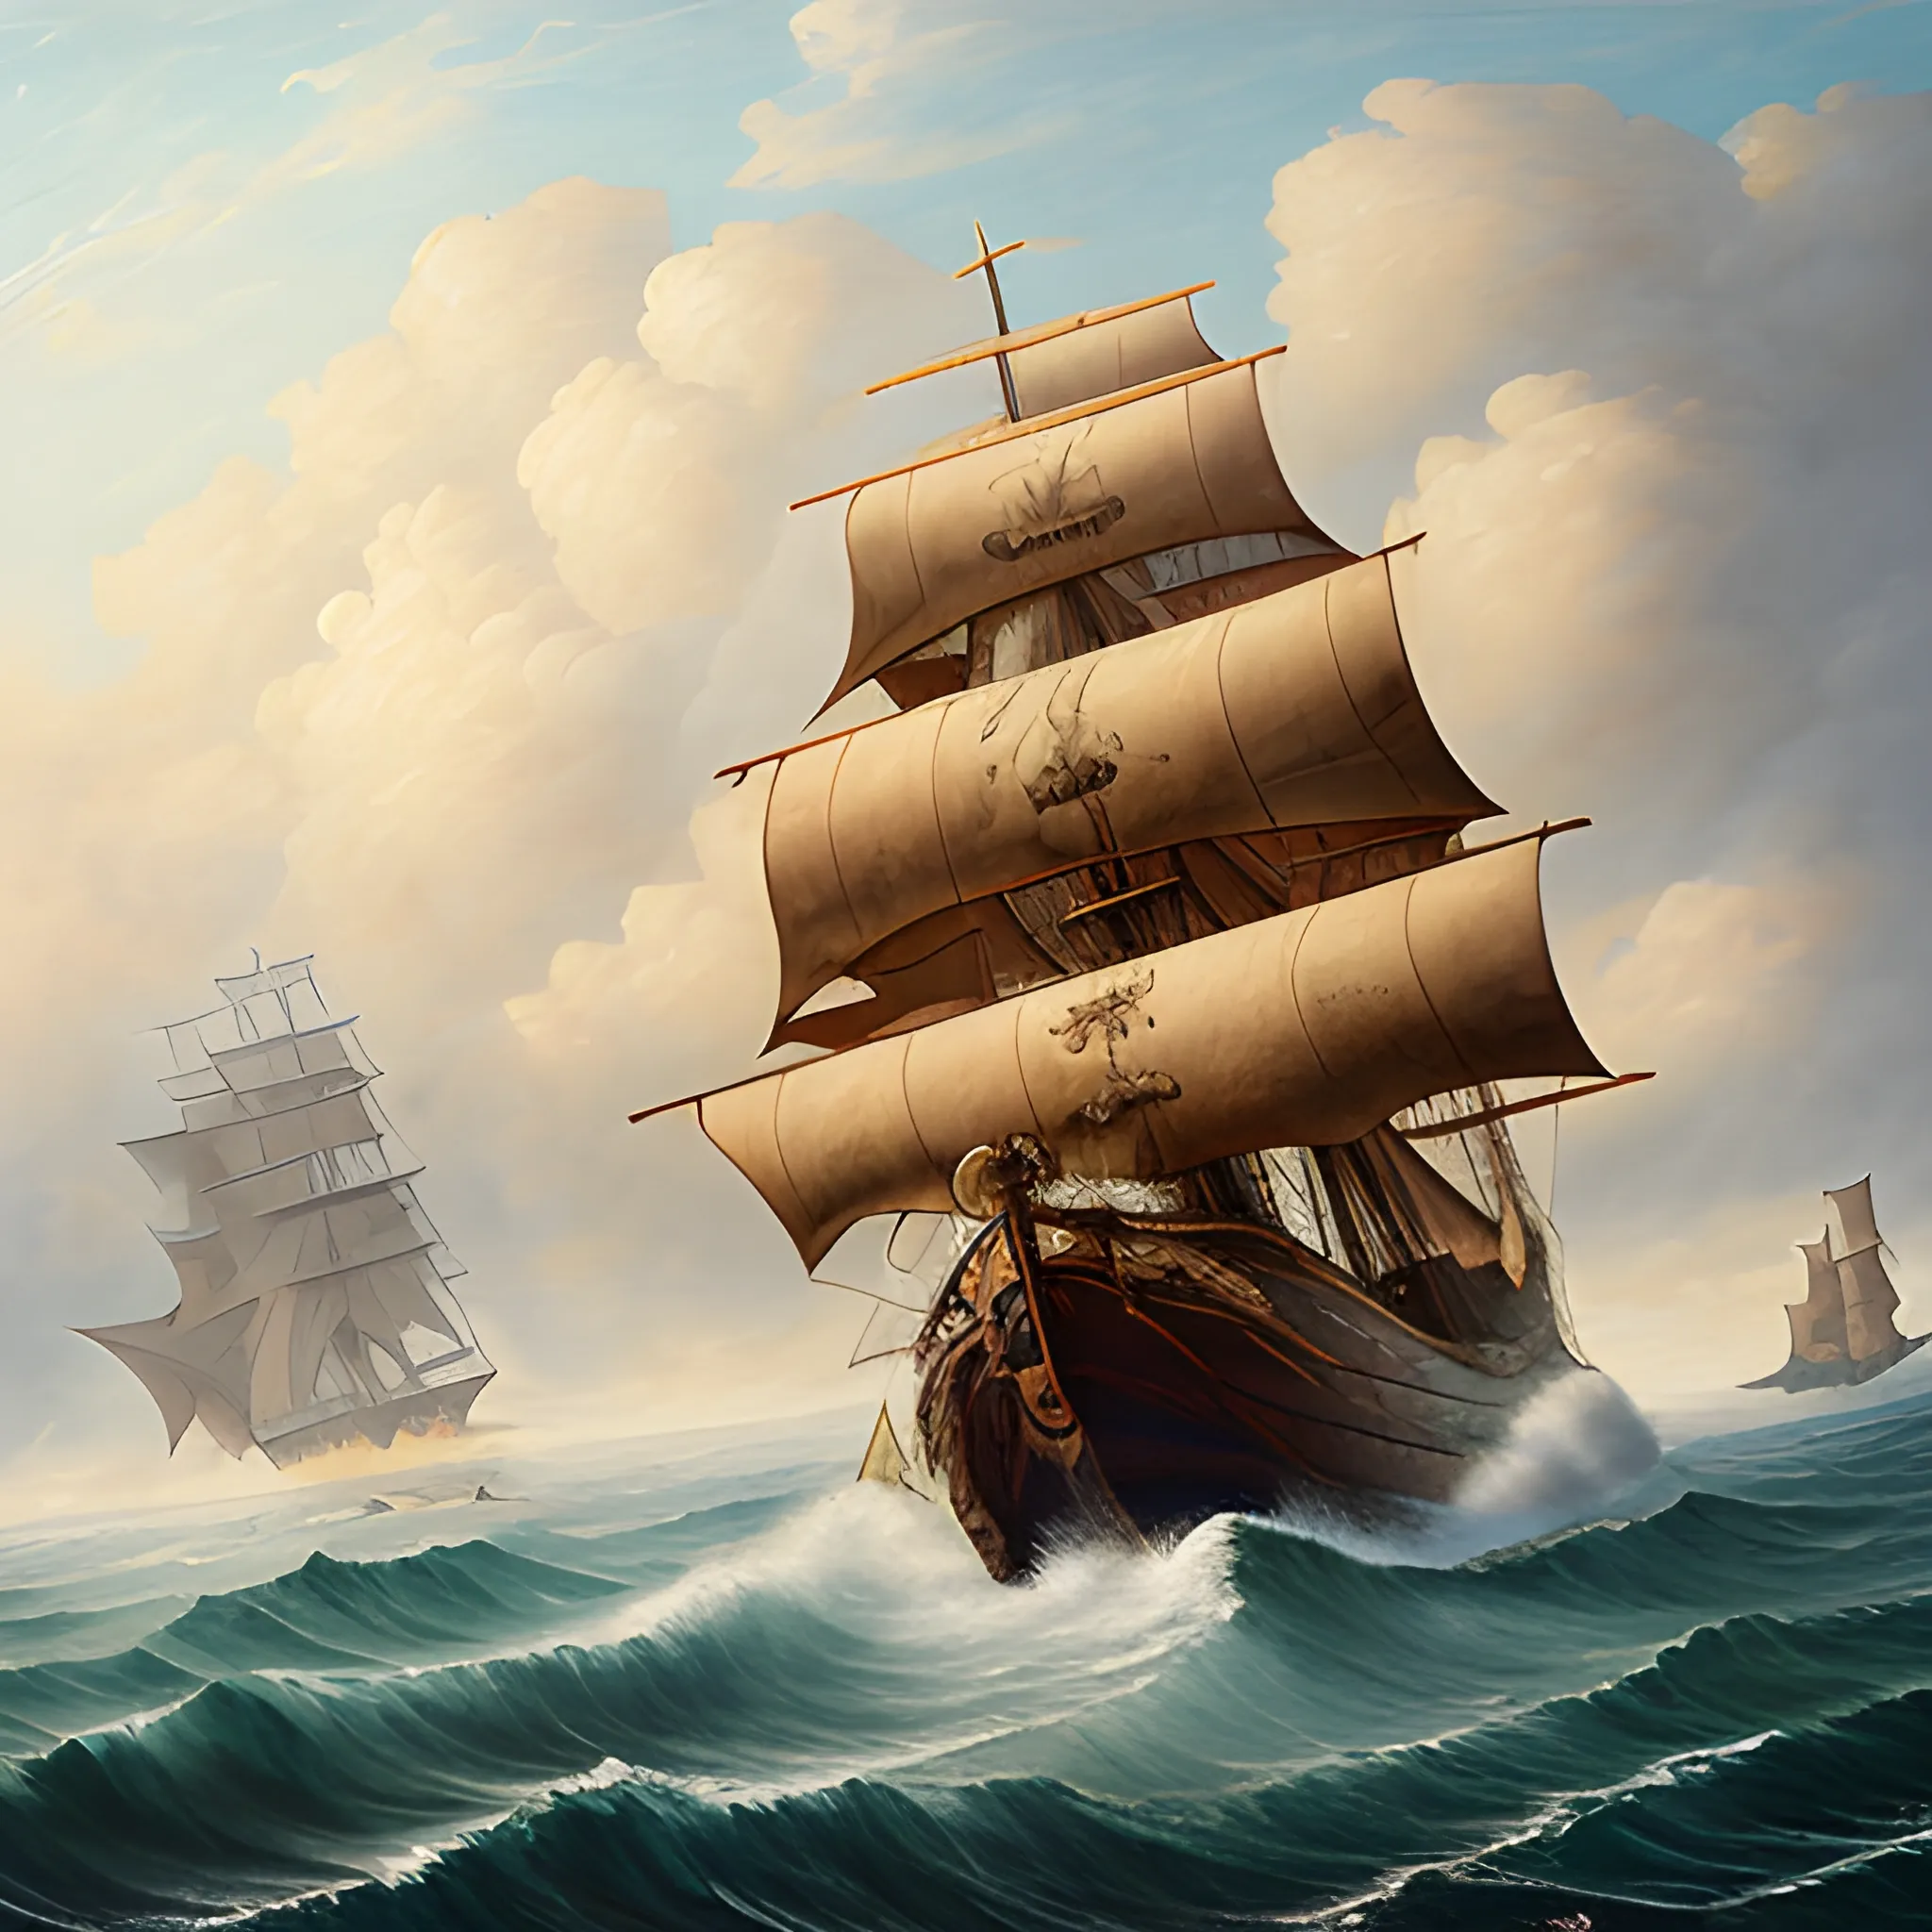 A pirate ship sailing in a wavy sea, thick burlap sails blown with the wind, large ship, full side view of the ship, view from the starboard side of the ship, Wonderful painting, Akihito Yoshida oil painting style, highly detailed,